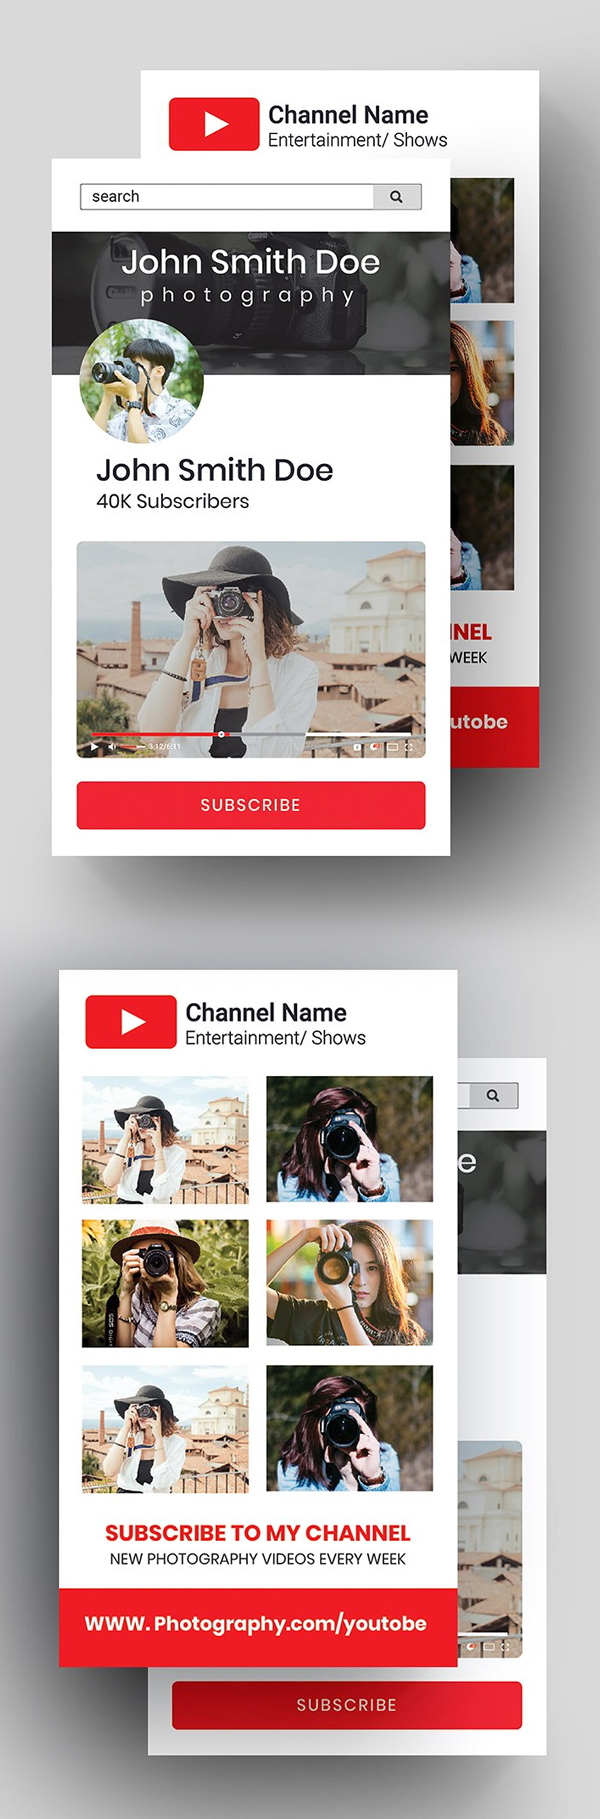 YouTube Business Card Template Design